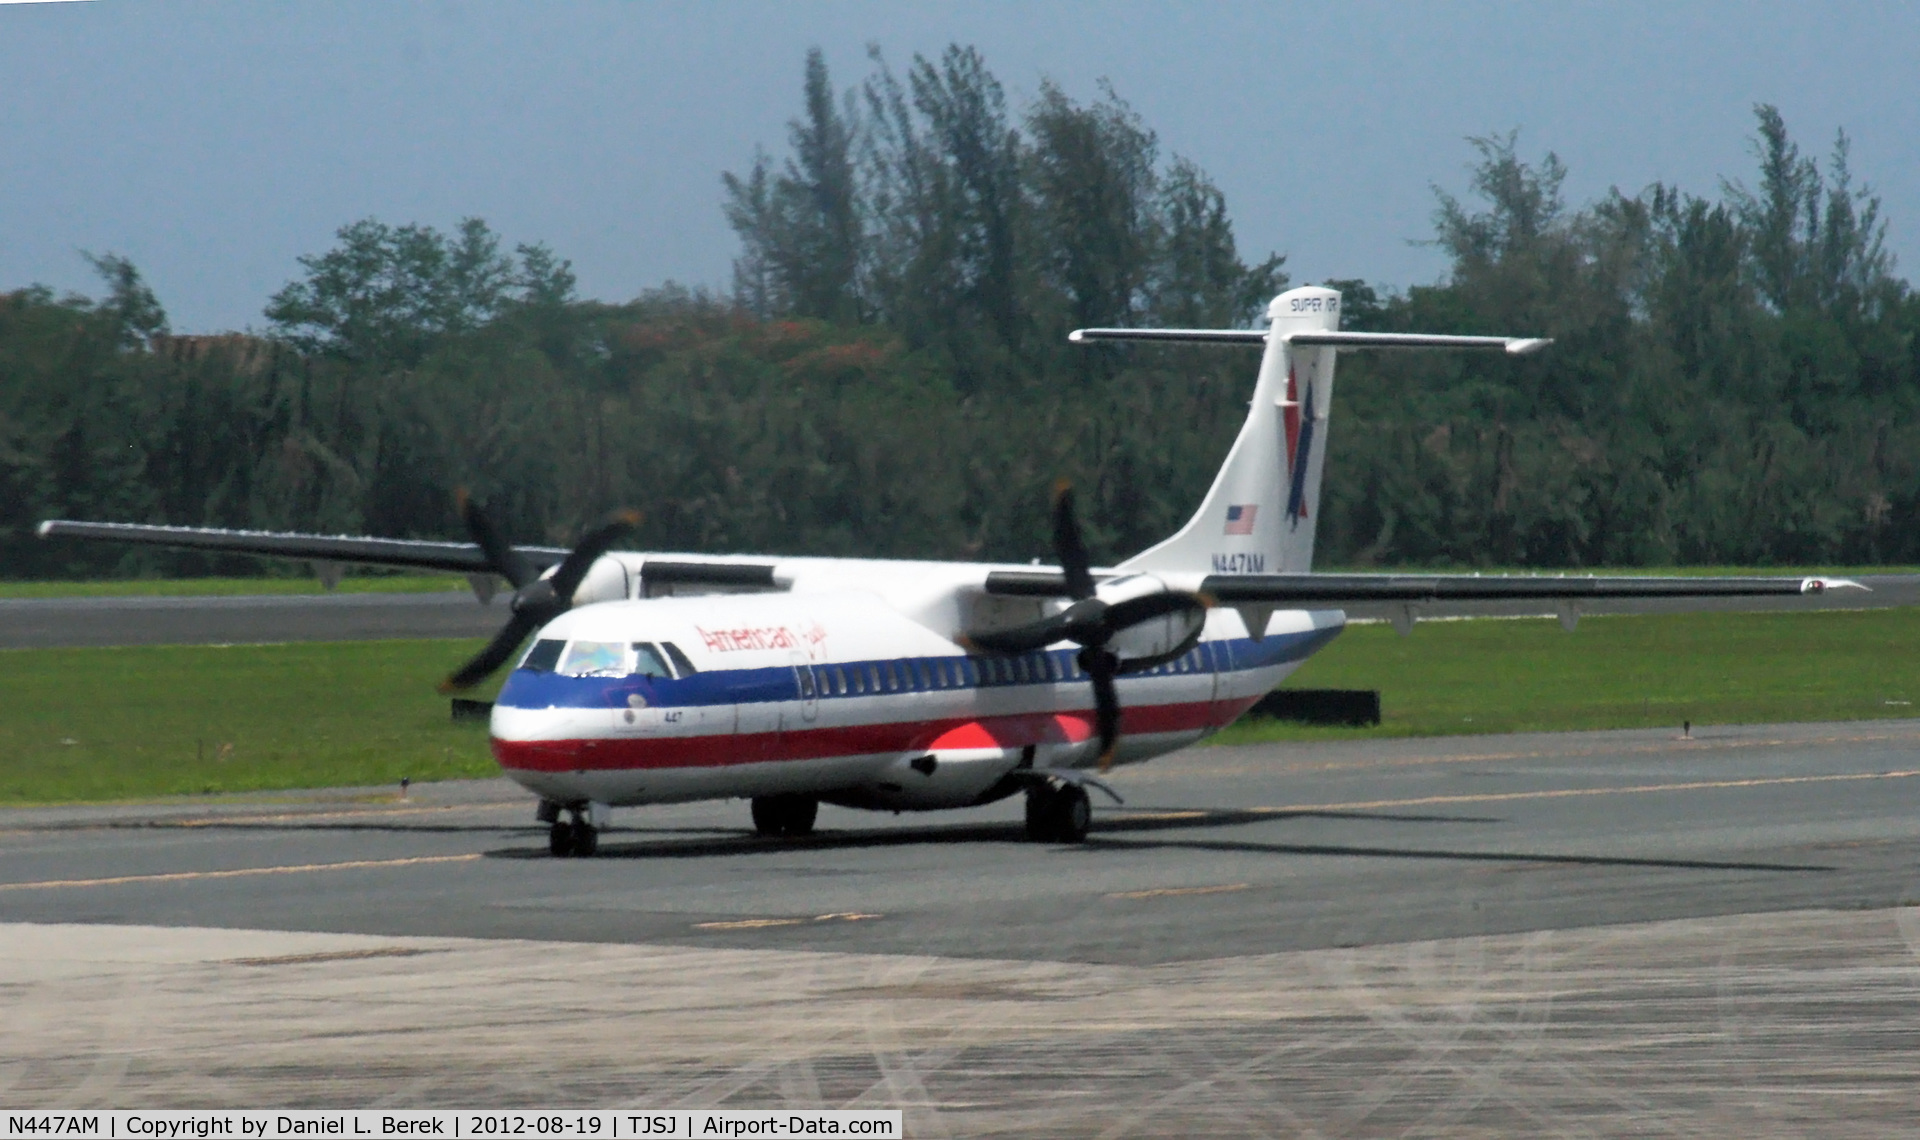 N447AM, 1995 ATR 72-212 C/N 447, An American Eagle ATR-72 taxies at SJU, next in line for take-off.